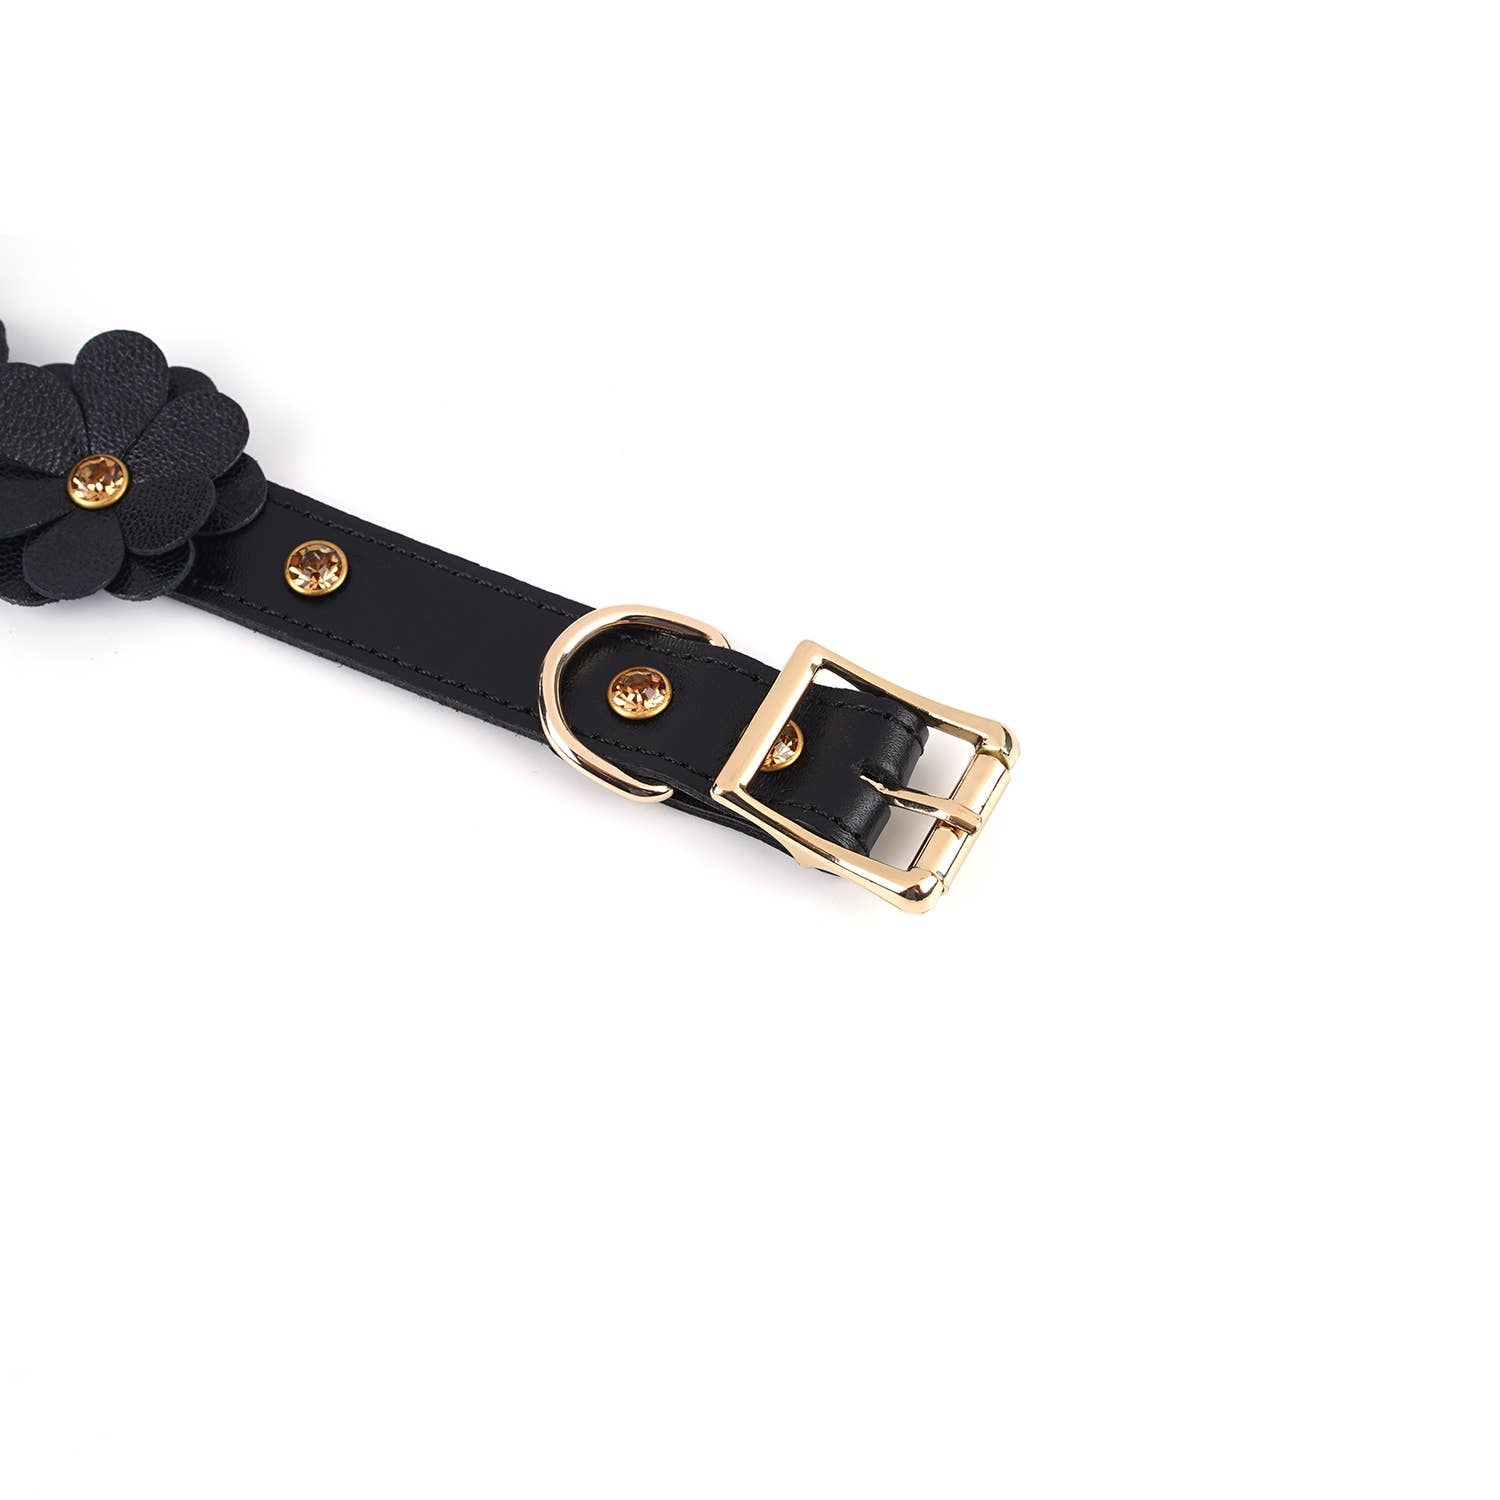  Black Leather Floral Collar with Leash Kink by Liebe Seele- The Nookie